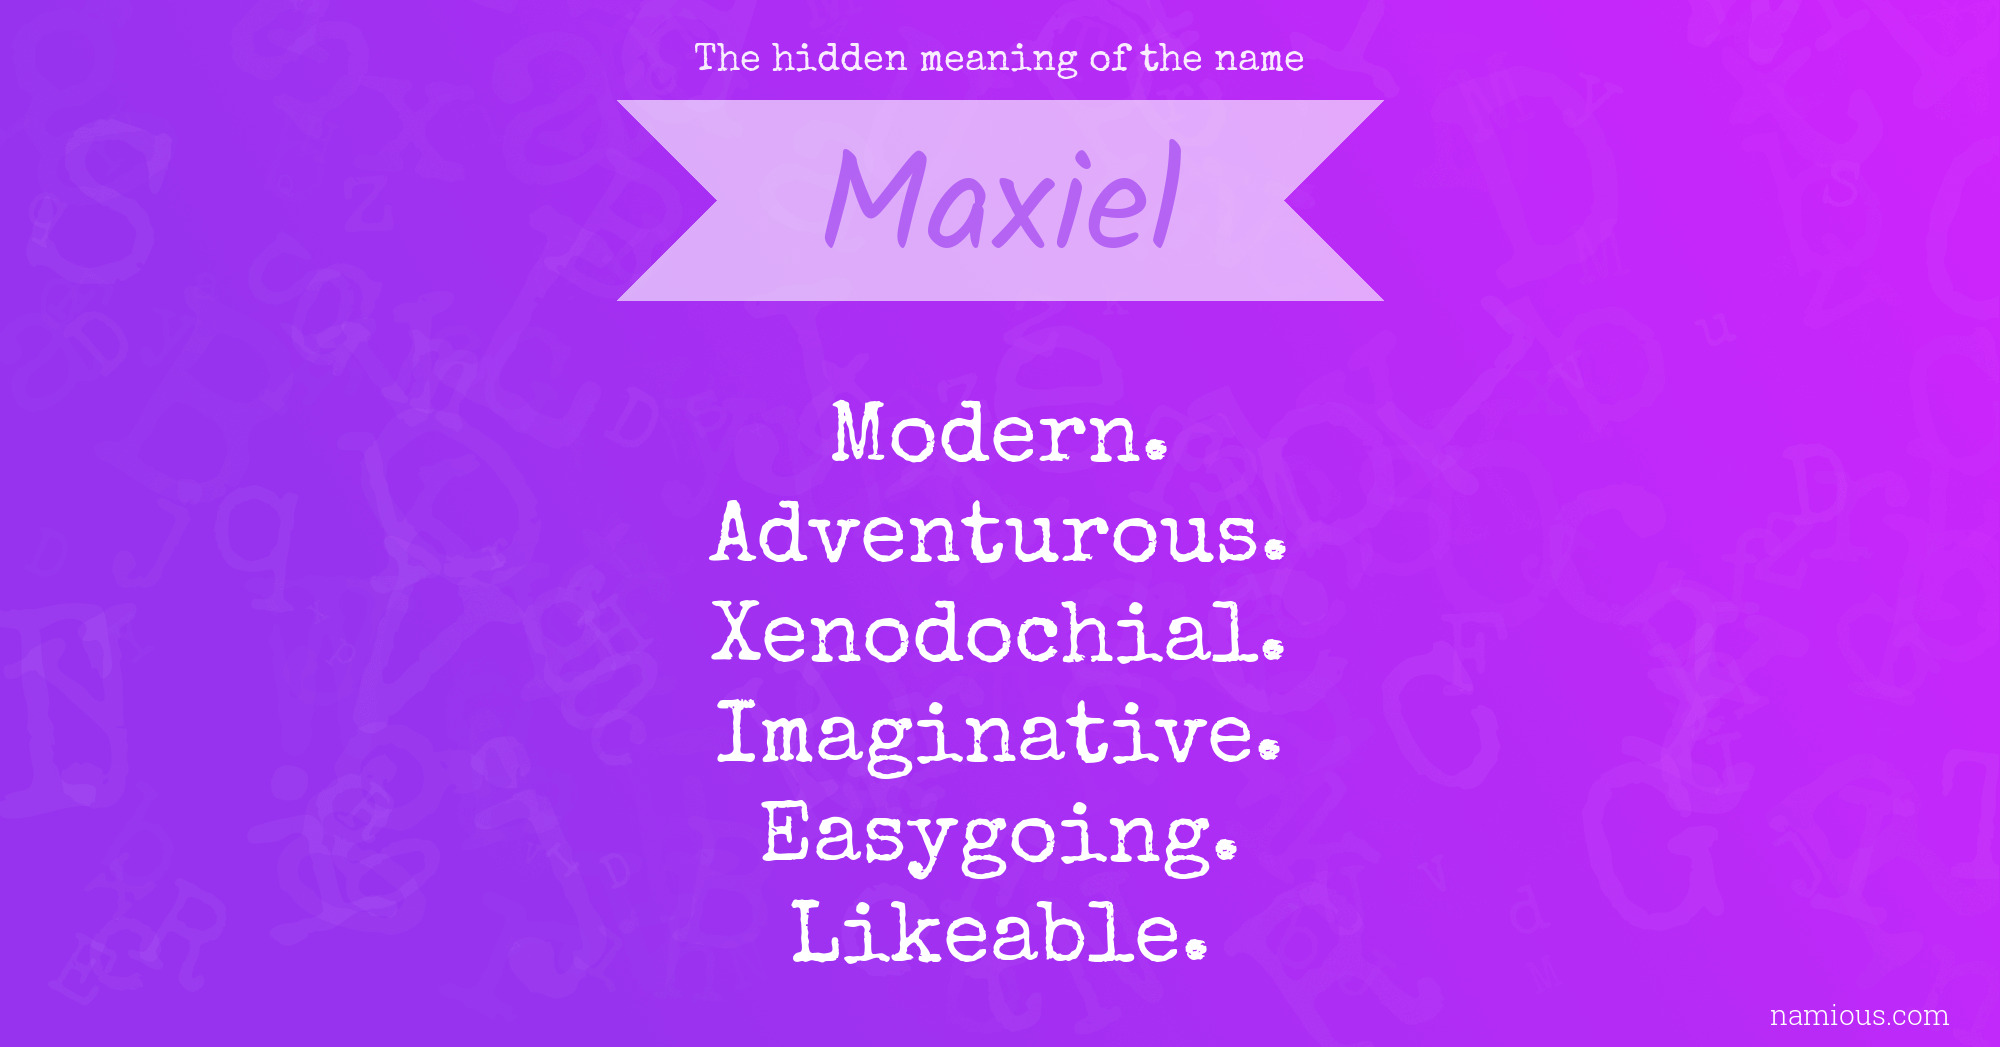 The hidden meaning of the name Maxiel